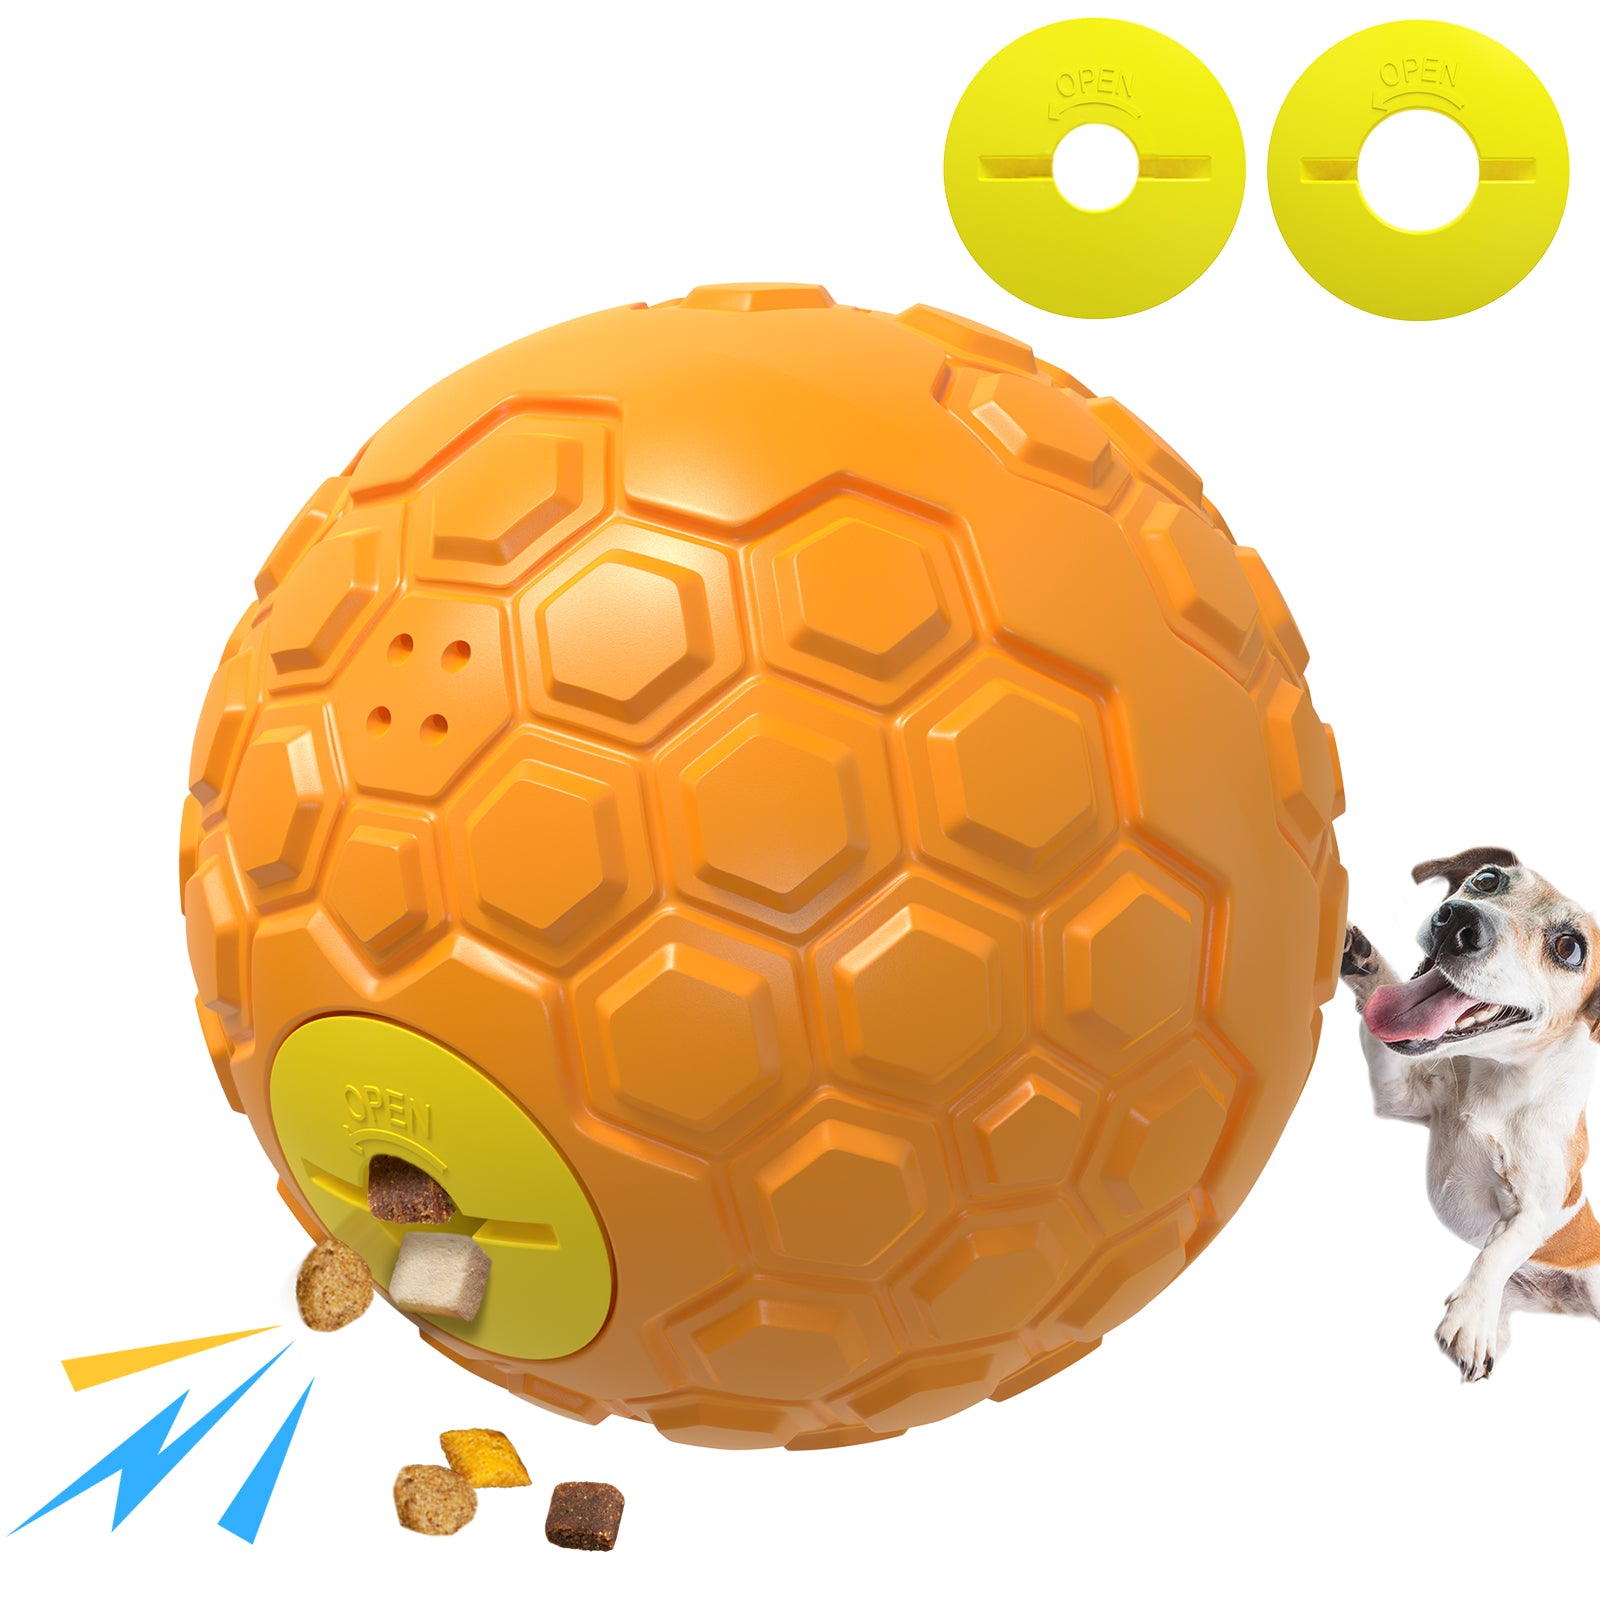 KADTC Dog Puzzles Balls-Adjustable Food Dispensing Treat Dispenser Feeding Puzzle Feeder Toy Wobble Wag Talking Giggle Squeaky Puppy Chew Rubber Ball for Small/Medium/Large Aggressive Chewers Dogs